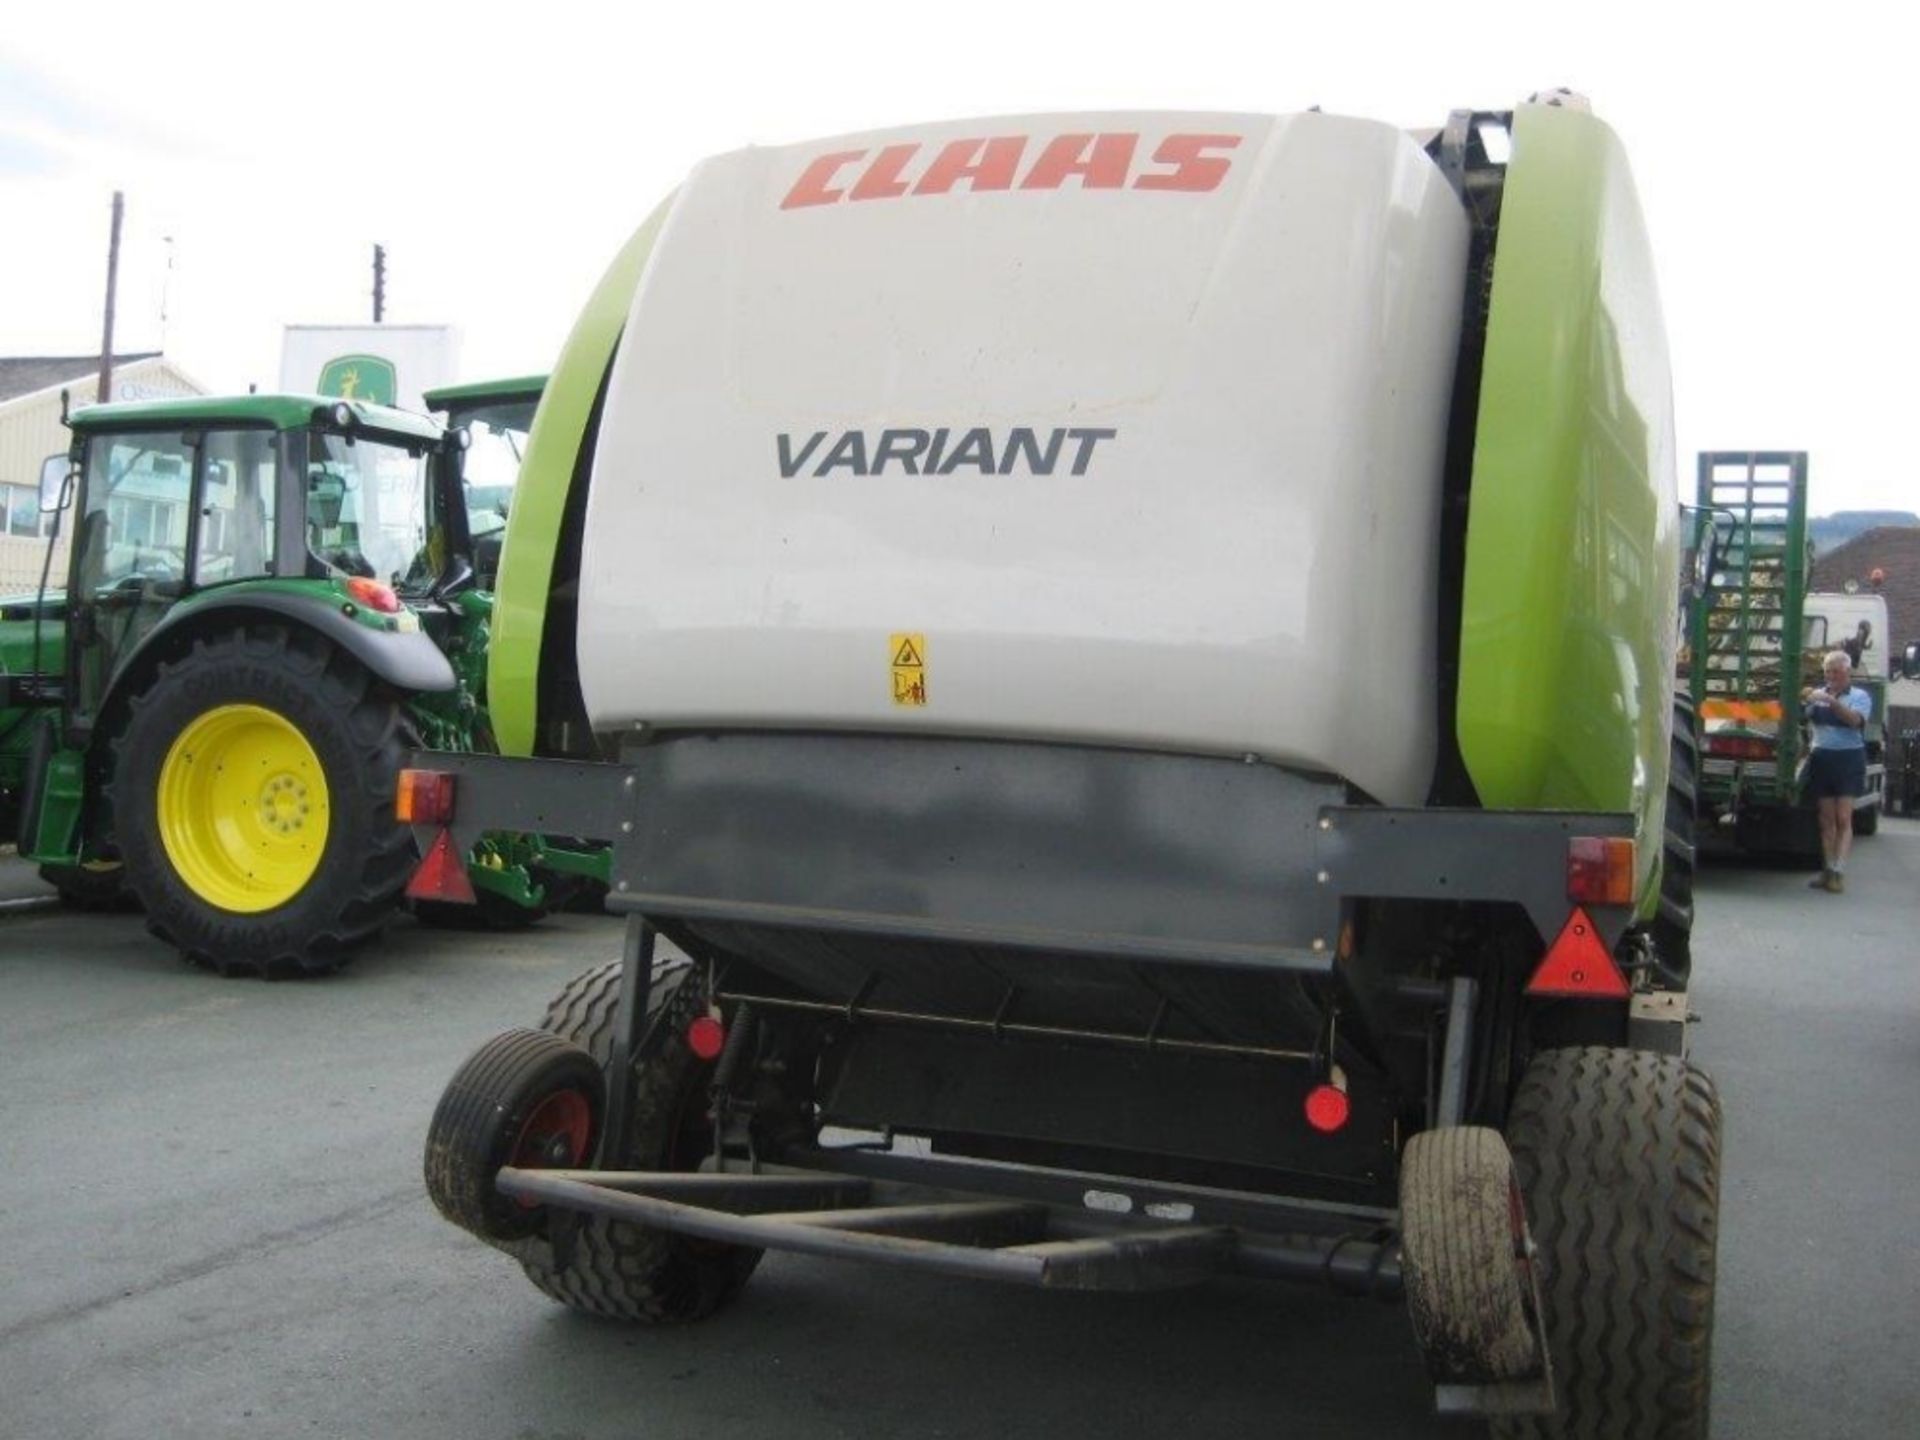 2007 Claas Variant 360 Round Baler with Rotor Feeder.  Bale count: Approx 12,000 bales.  Ser.No. - Image 3 of 4